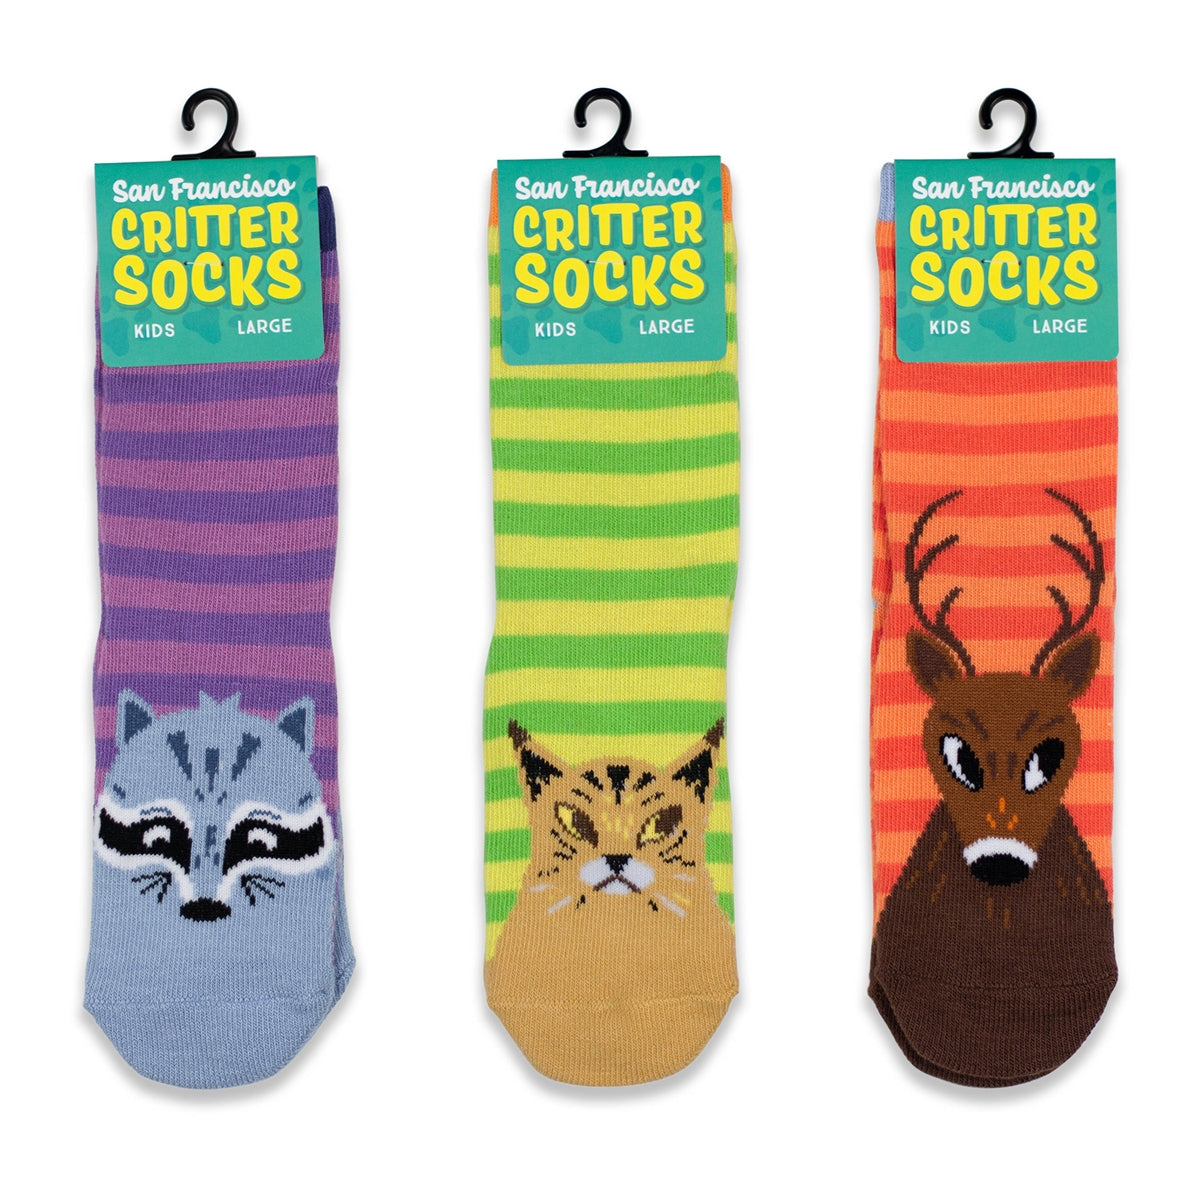 Multicolor striped orange-brown San Francisco Critter kids socks, with mule deer design and non-skid "tracks" feature on sole.